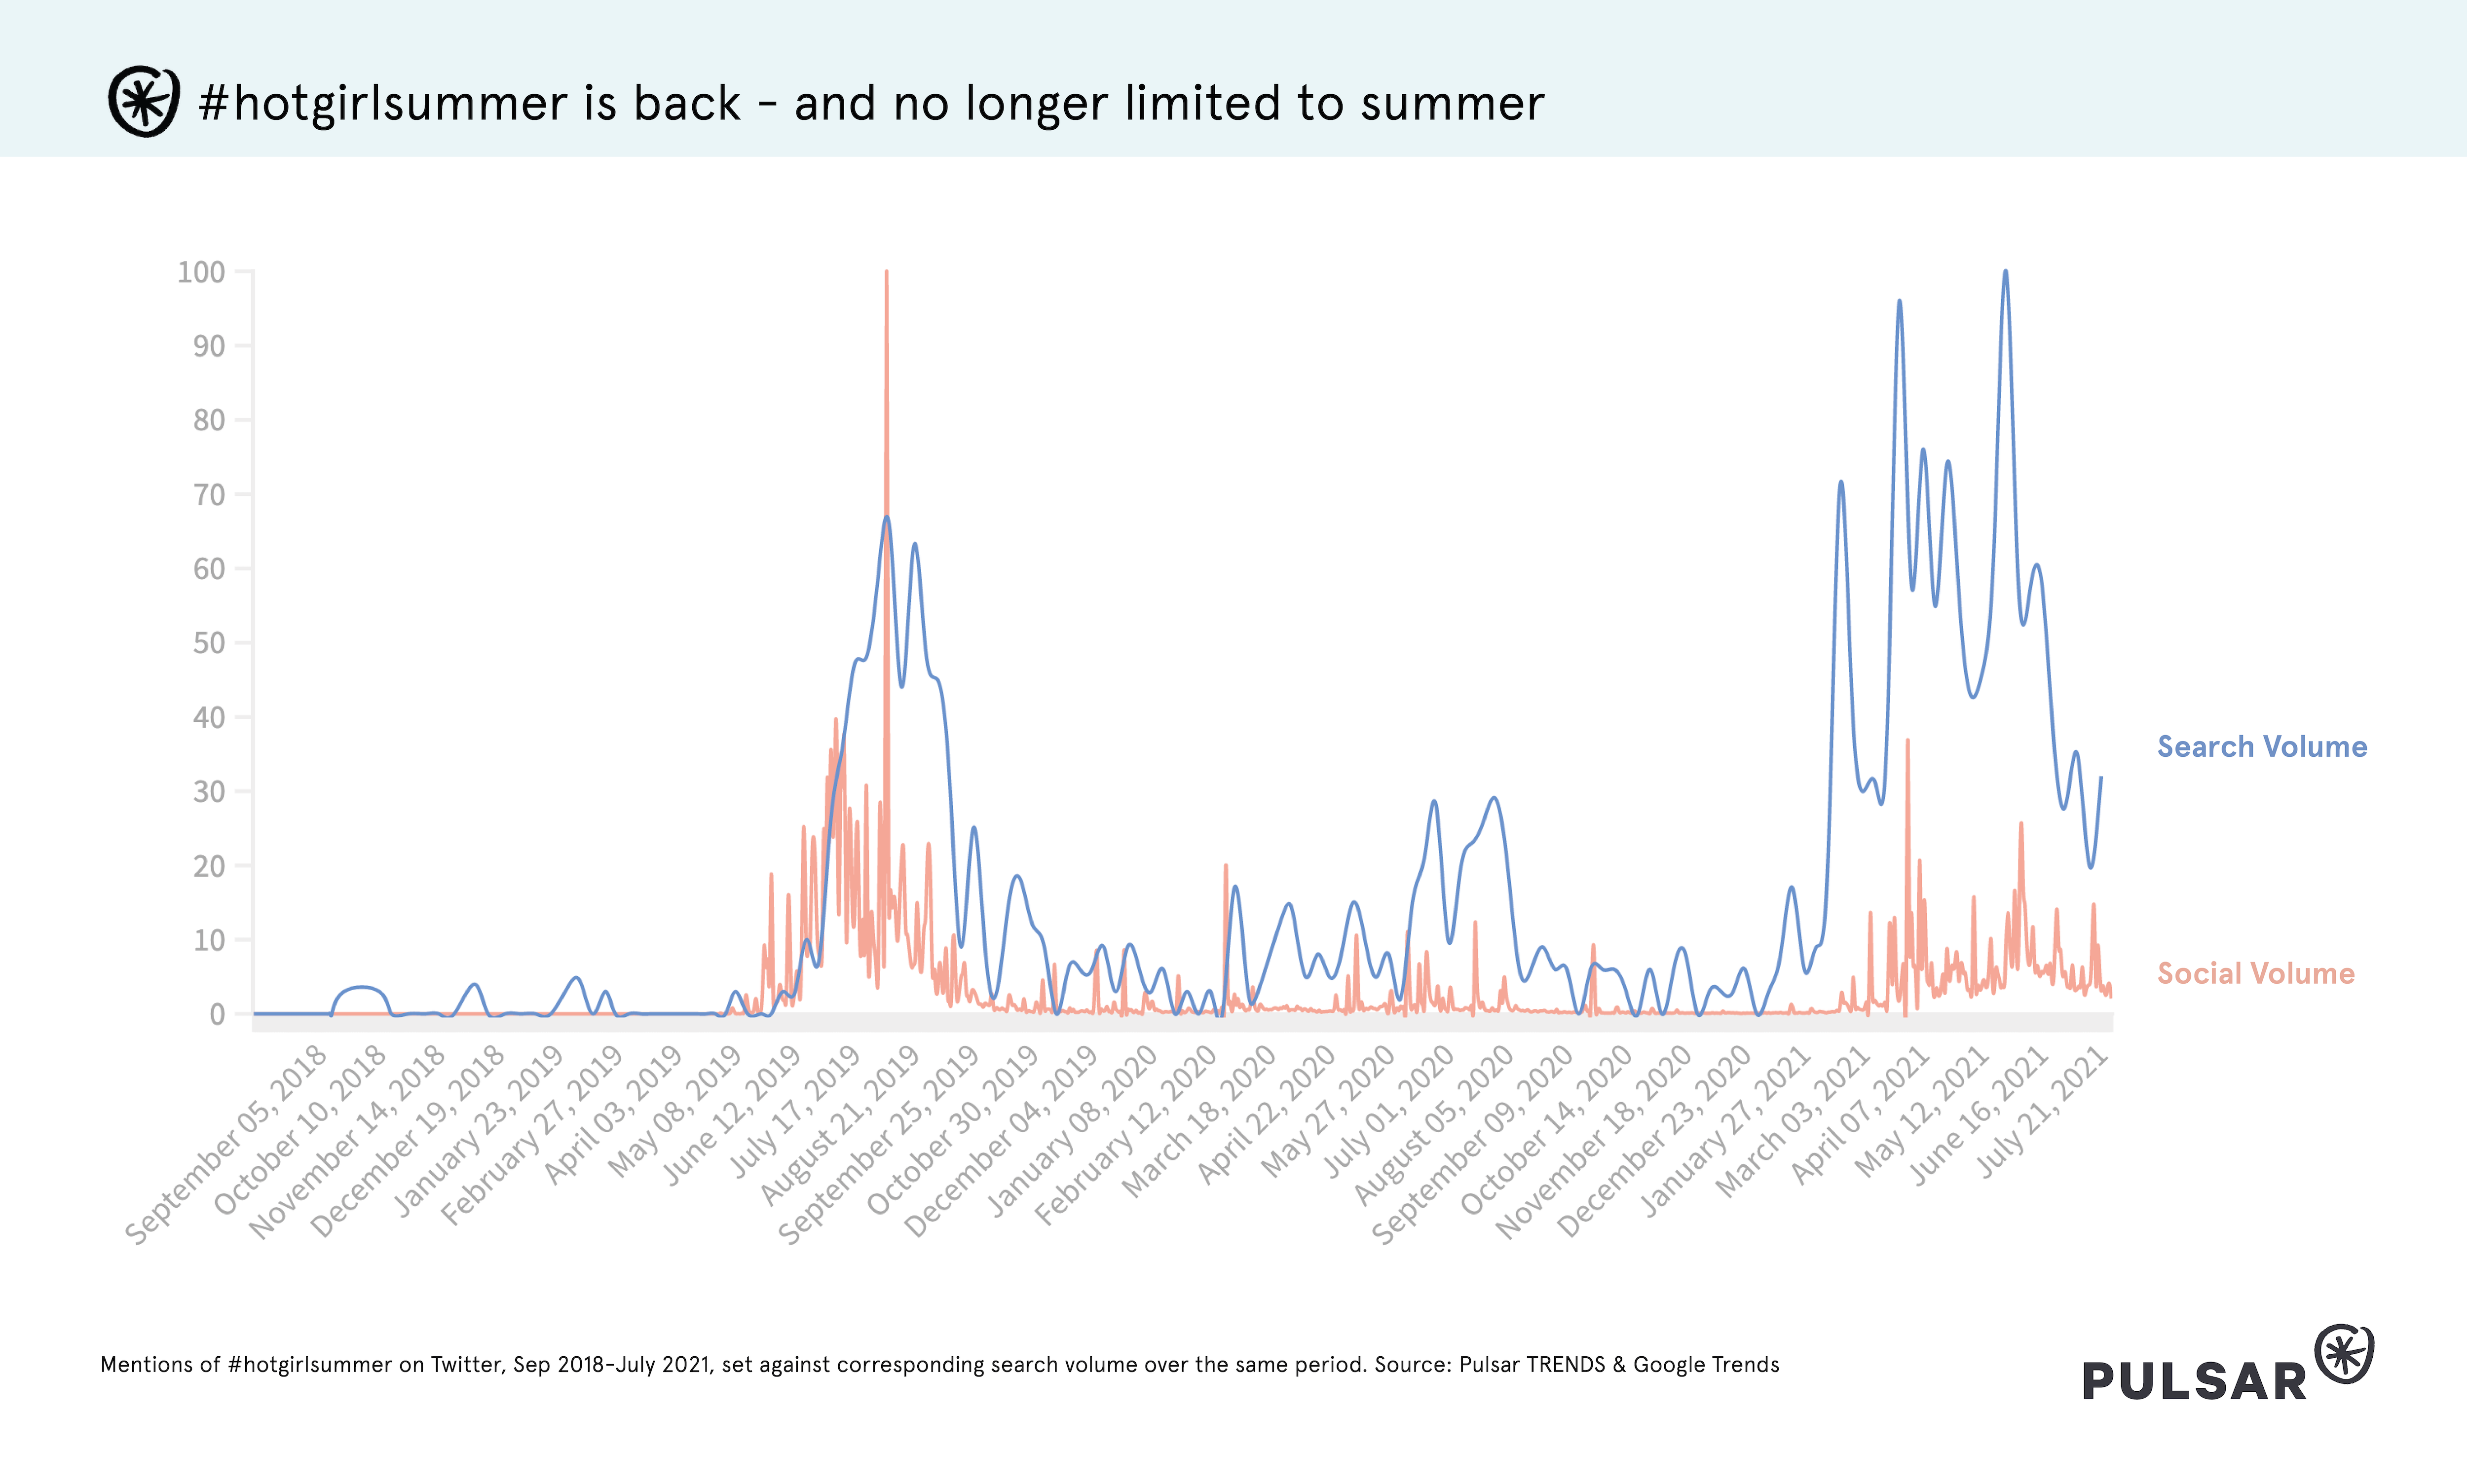 #hotgirlsummer in social and search data